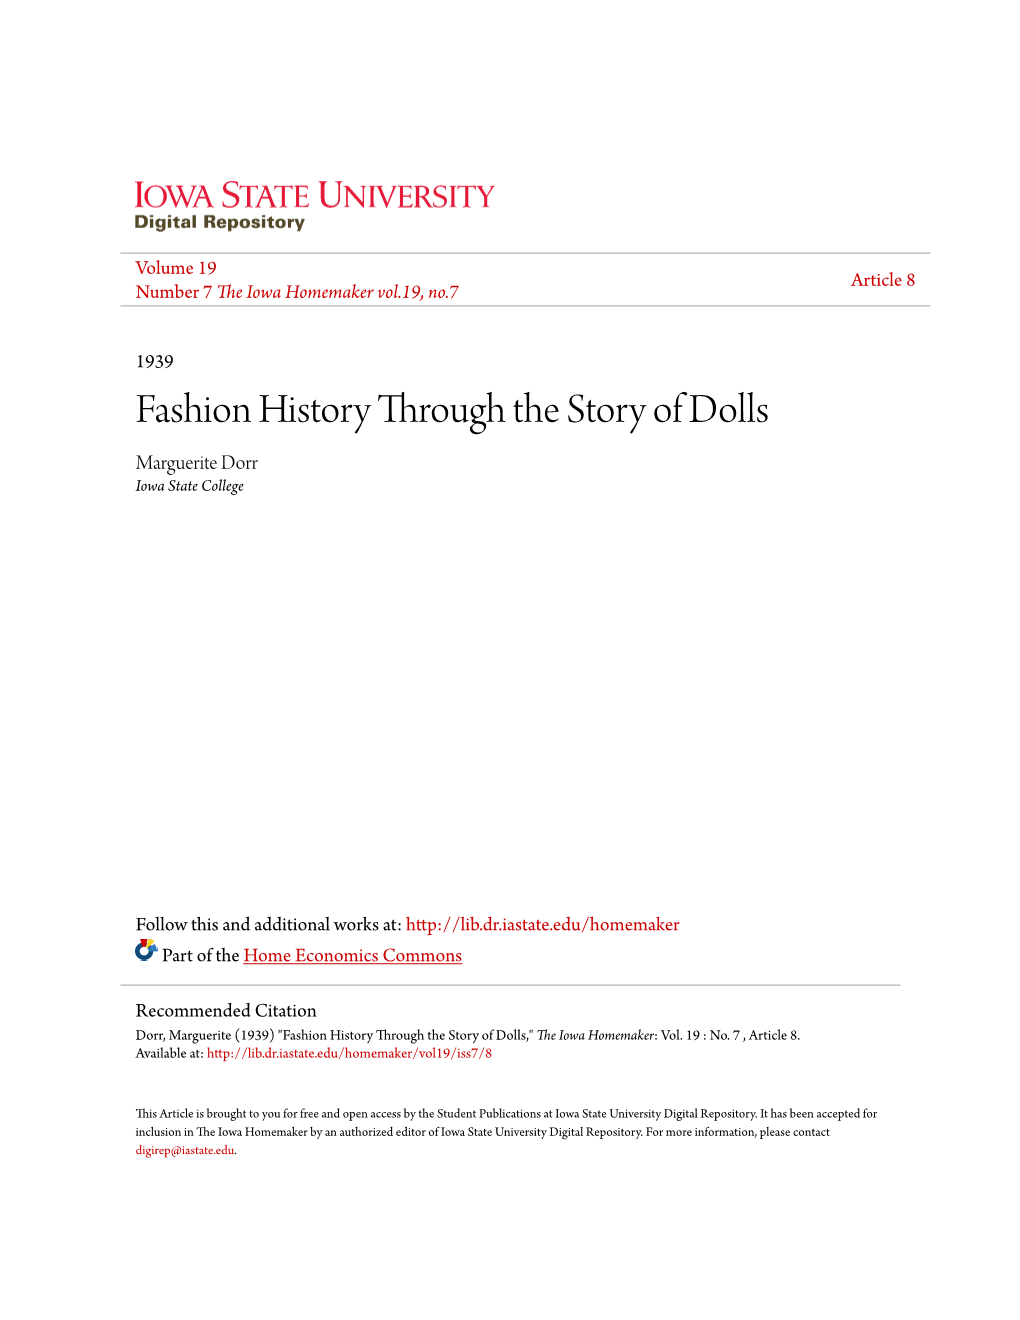 Fashion History Through the Story of Dolls Marguerite Dorr Iowa State College